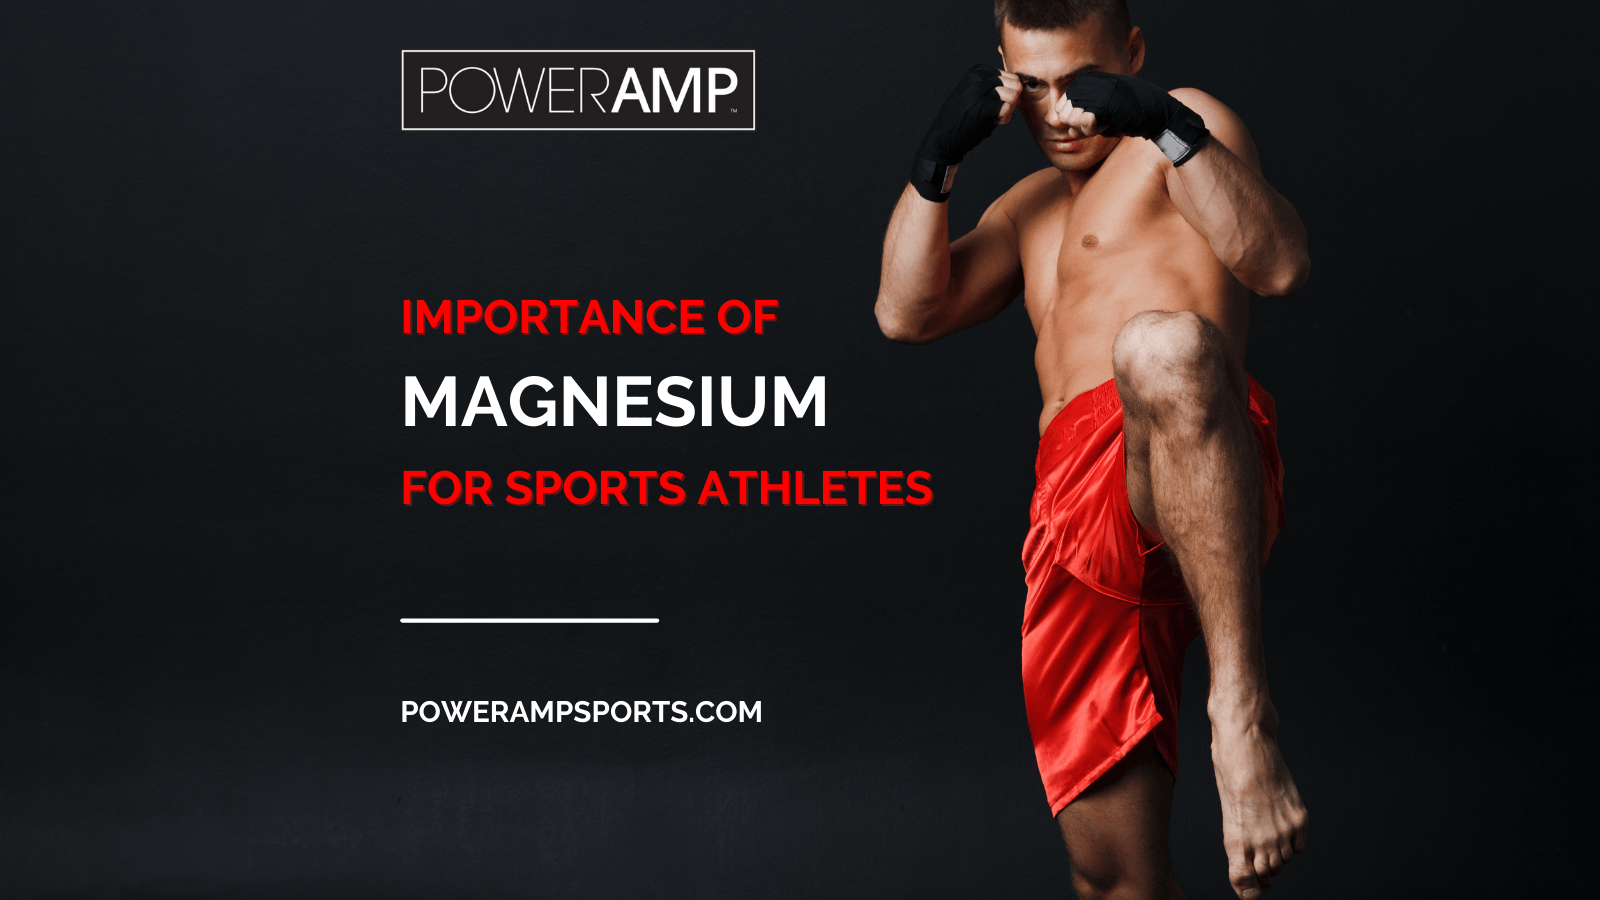 Importance of Magnesium for Sports Athletes